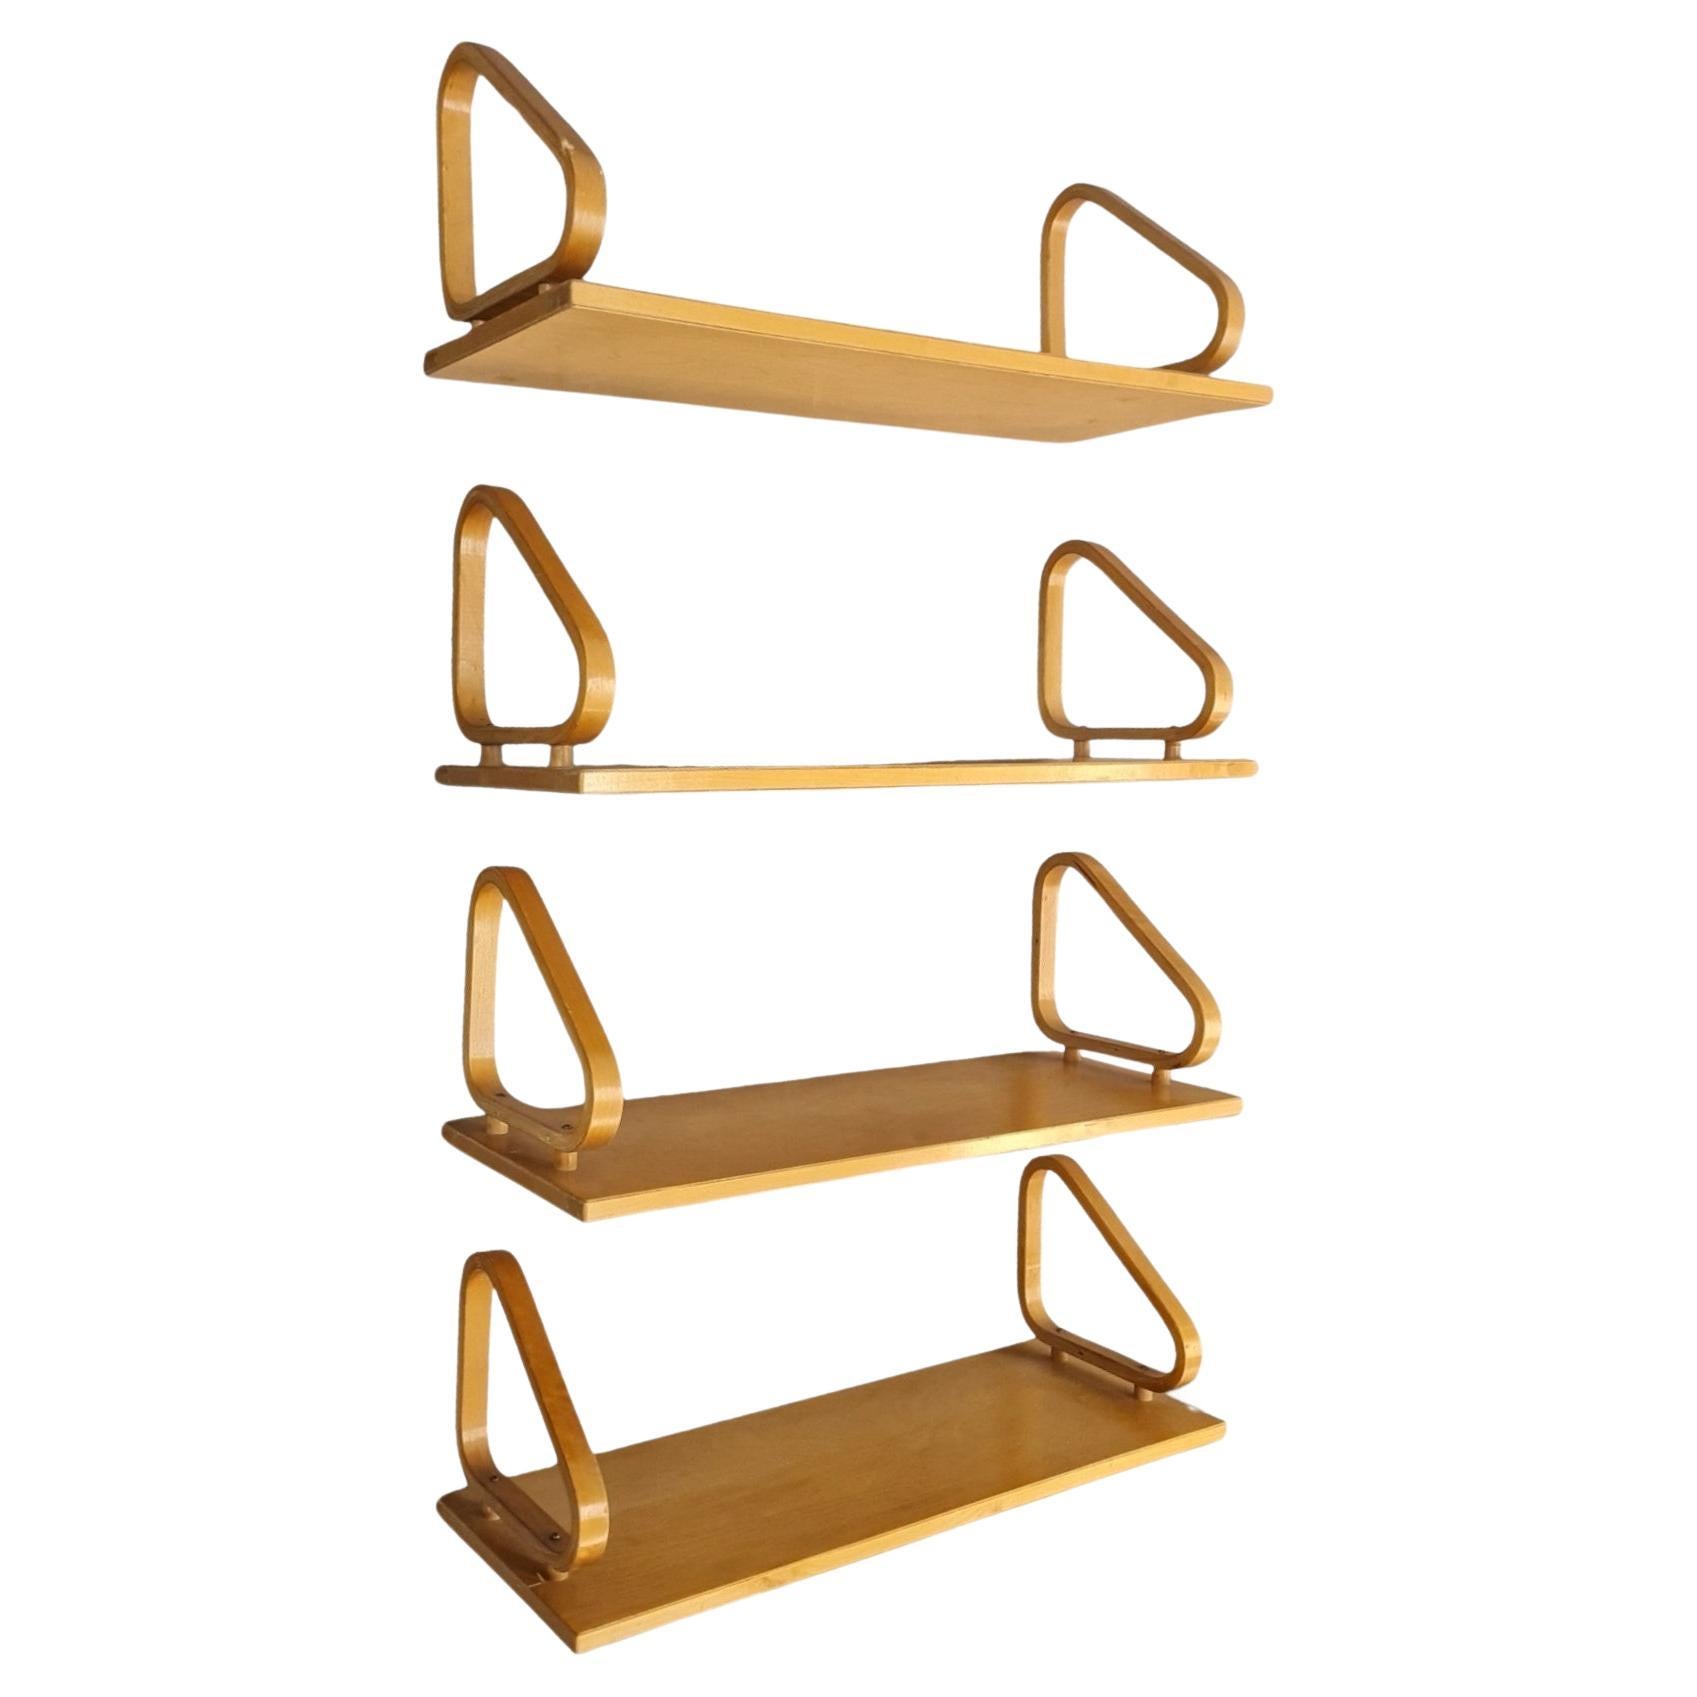 Rare Set of 4 Alvar Aalto Wall Shelves Model 112 with Pegs, 1930s.  For Sale